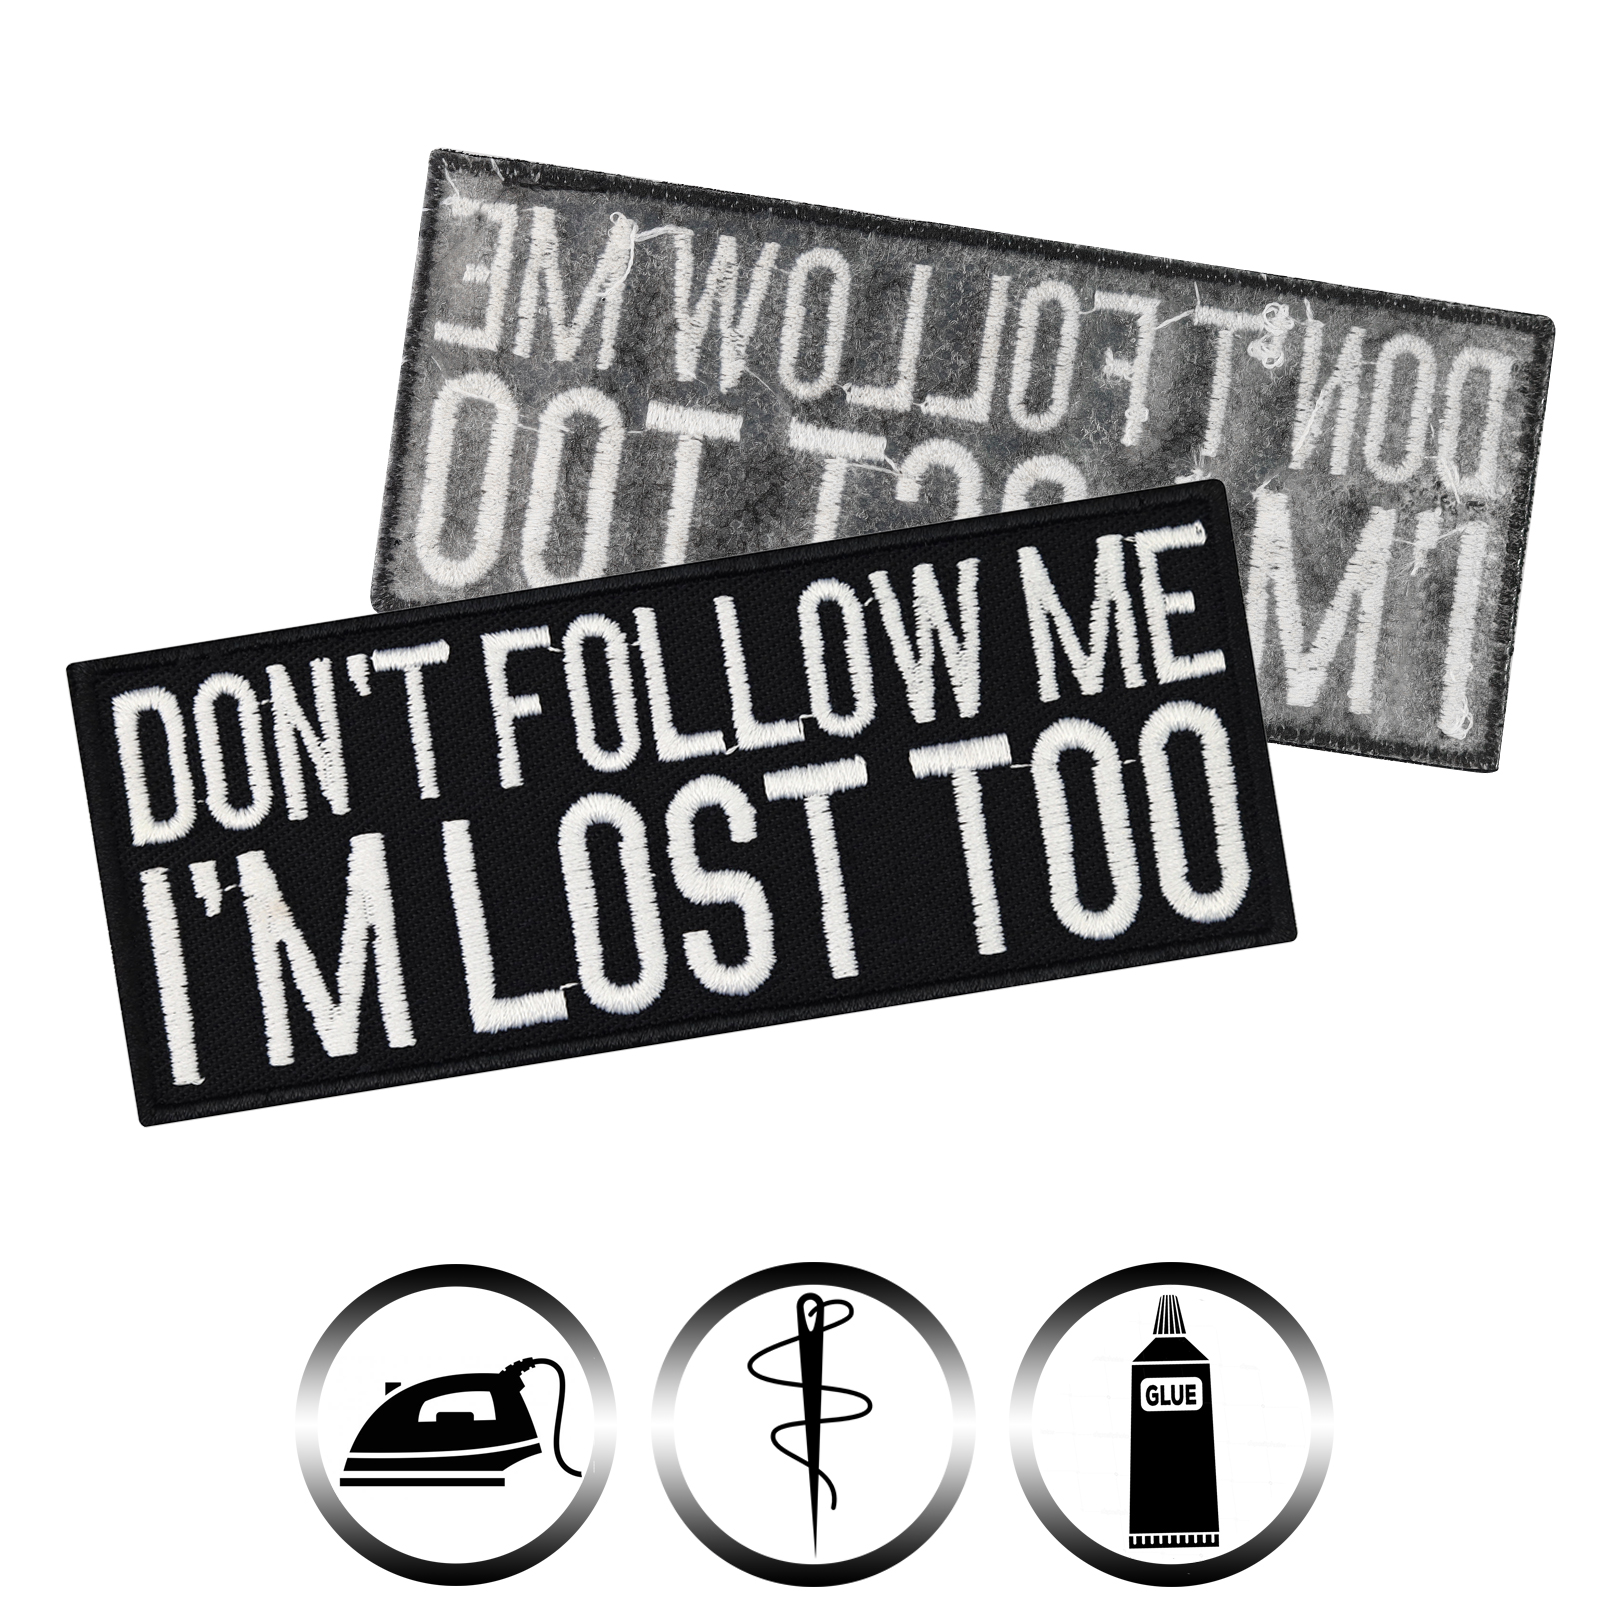 Don't follow me, I'm lost too. - Patch